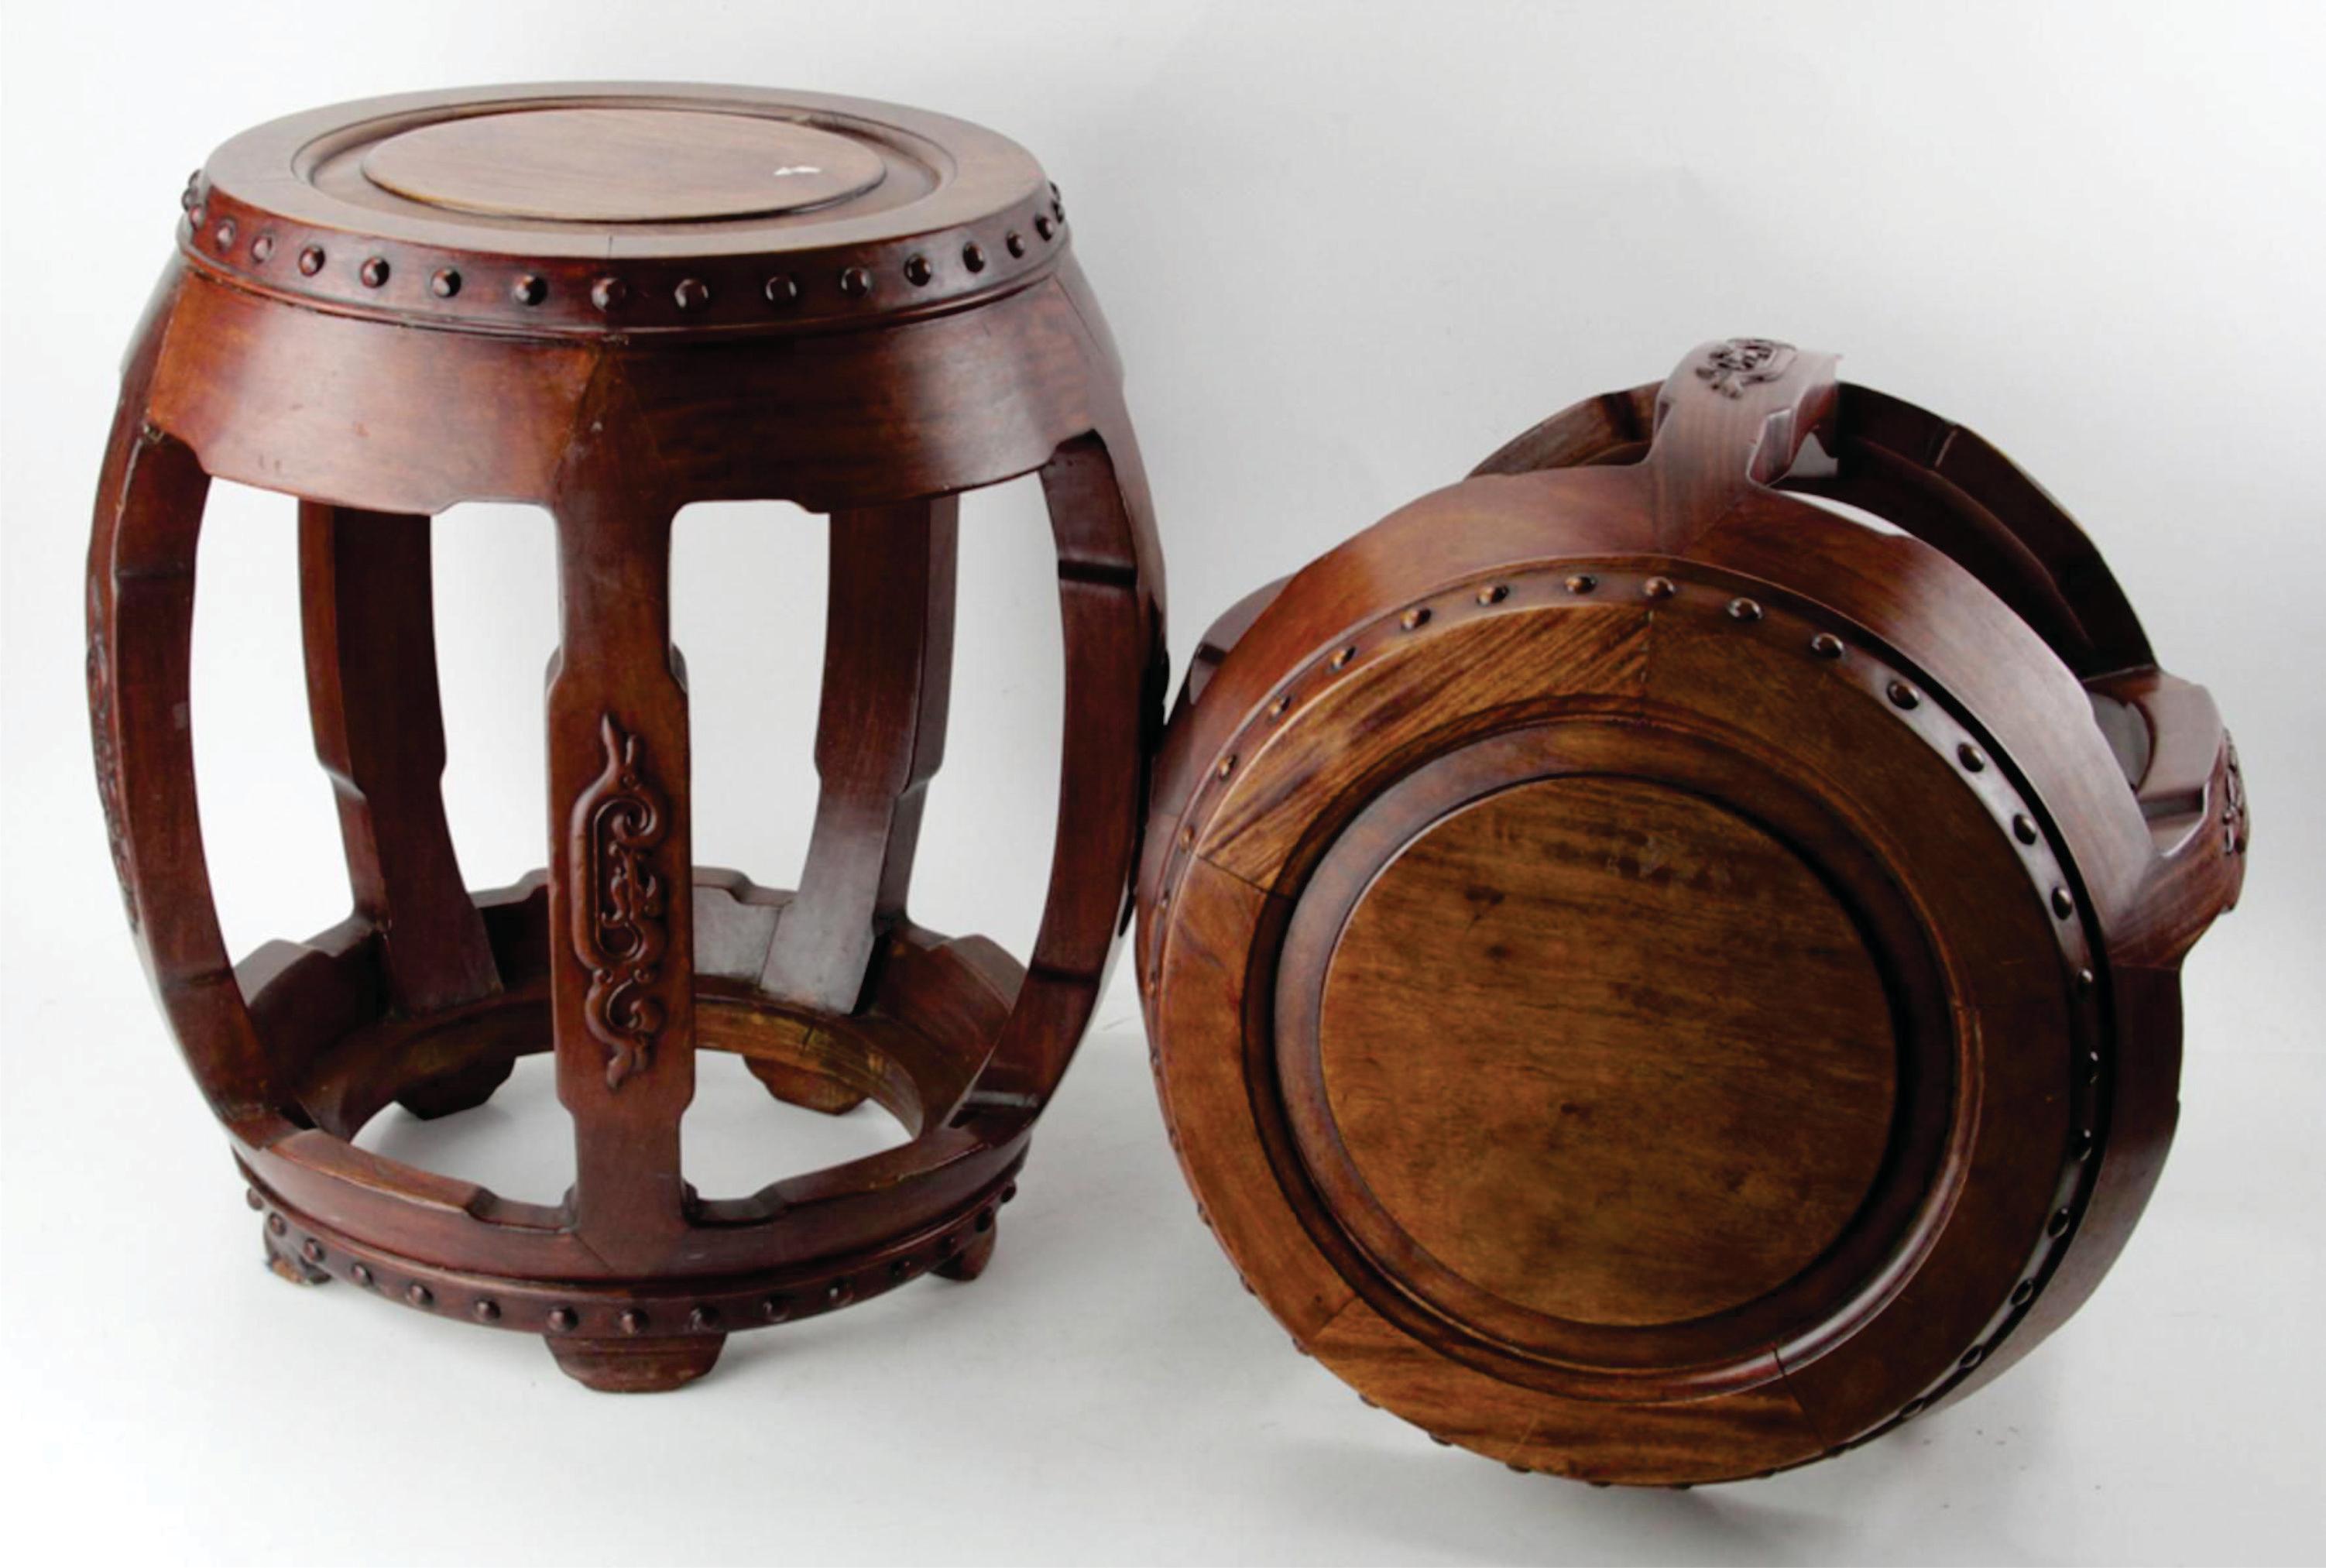 Description
Pair of Chinese Hongmu wood stools in the shape of a drum, 19